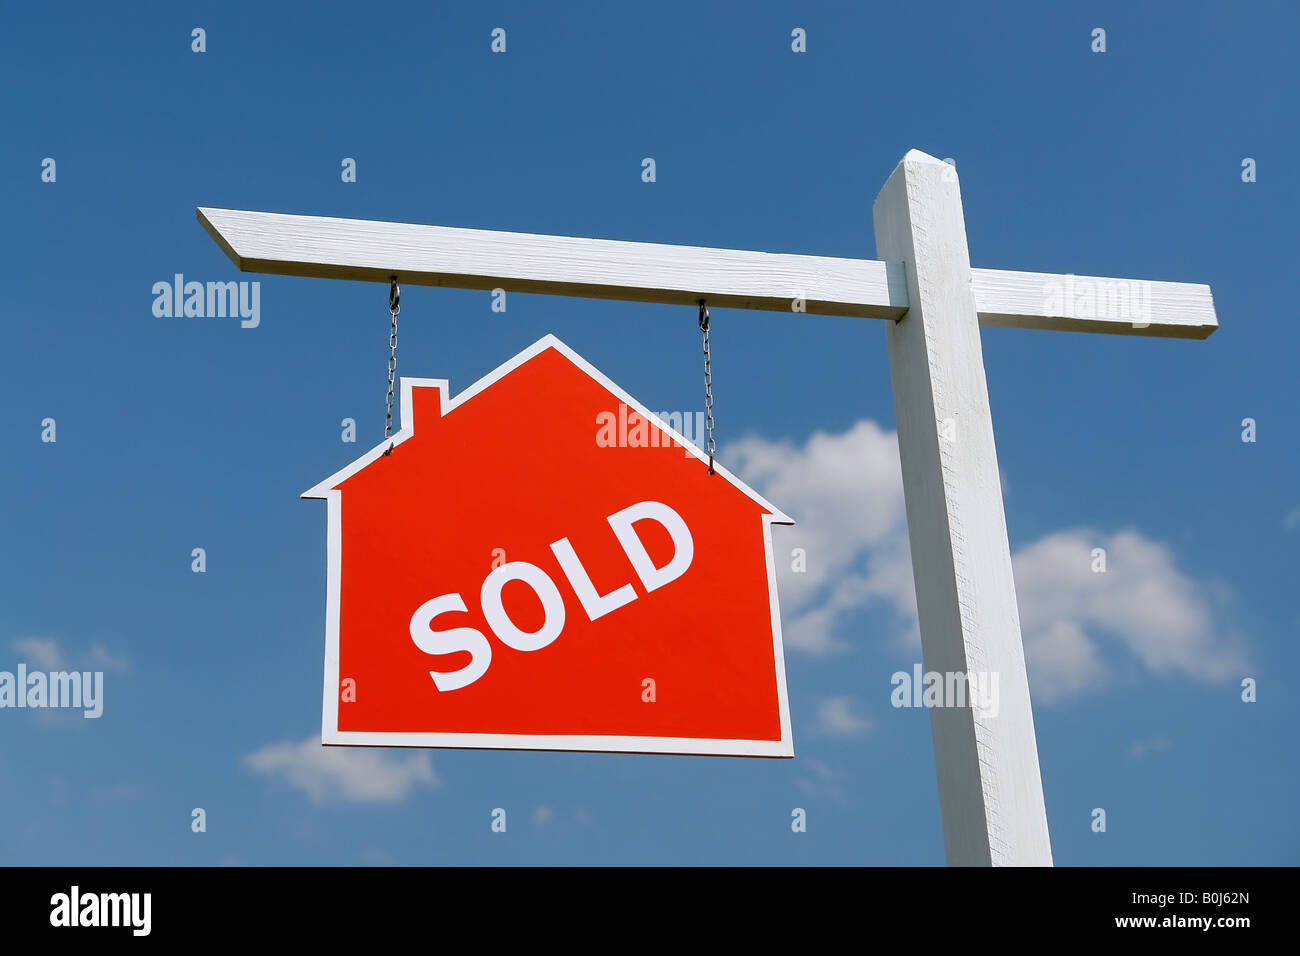 White wooden post with red house Sold notice board over blue sky Stock Photo